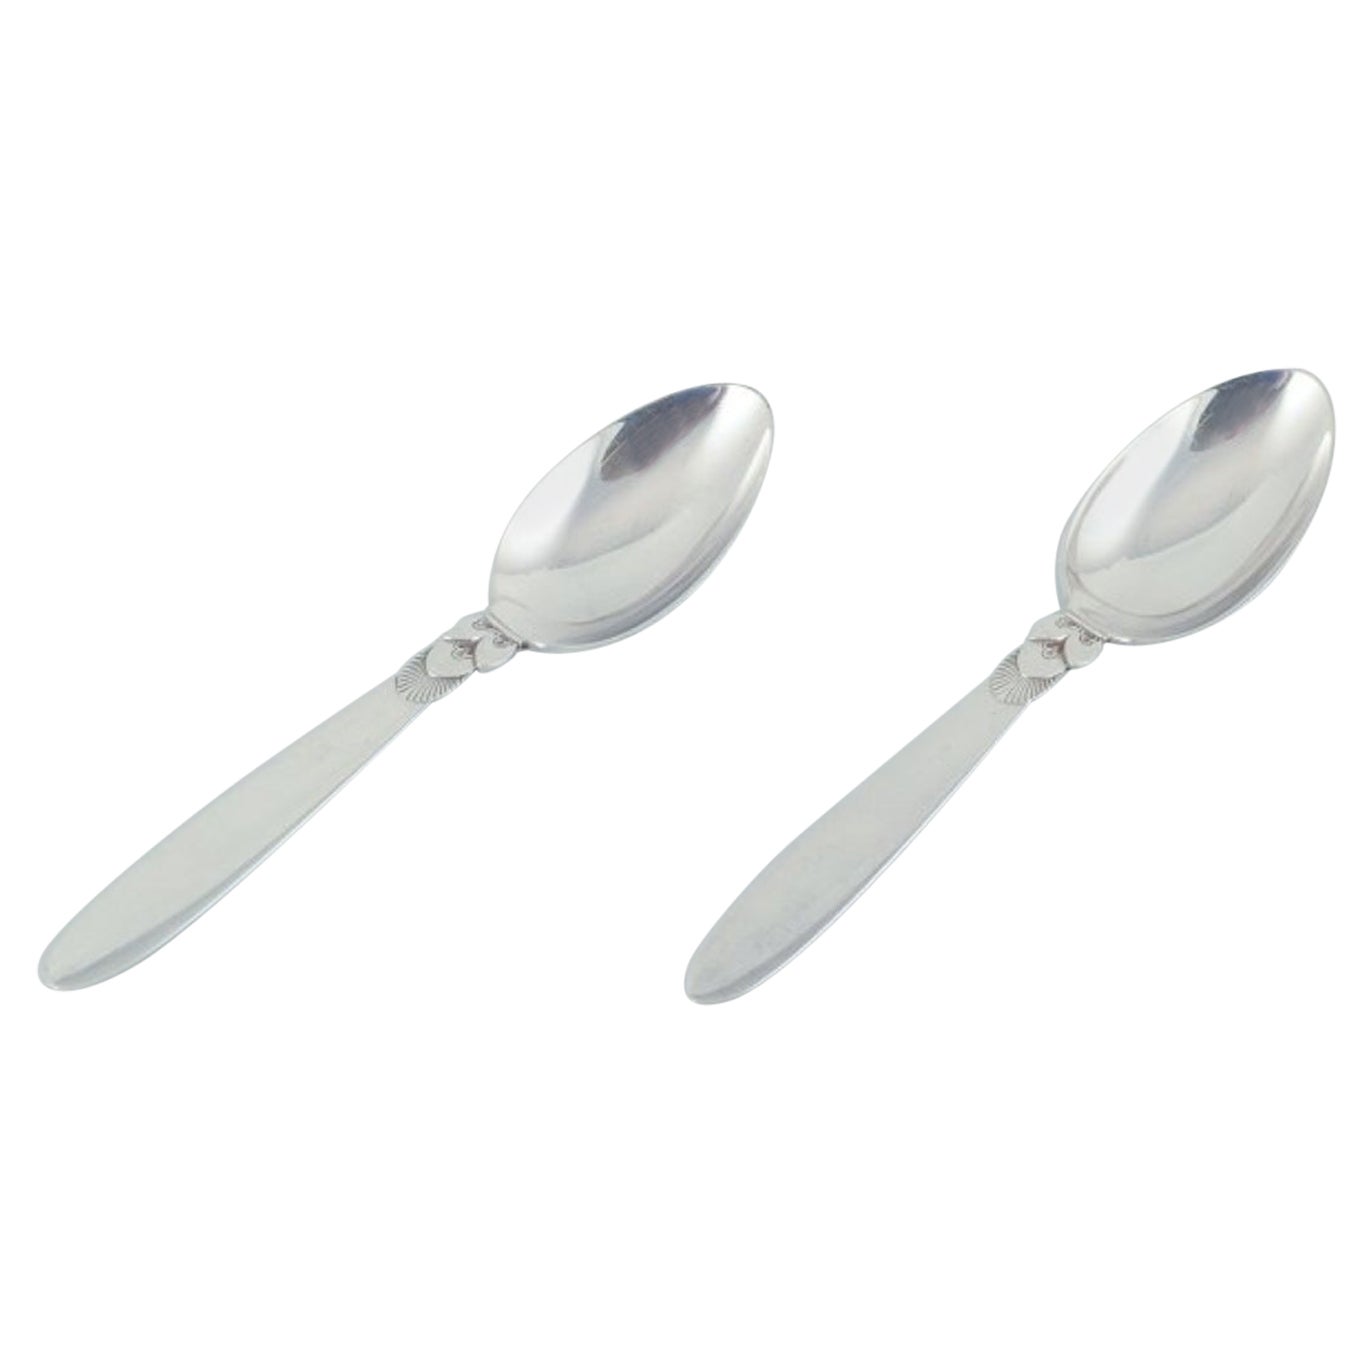 Georg Jensen Cactus. Two dessert spoons in sterling silver. 